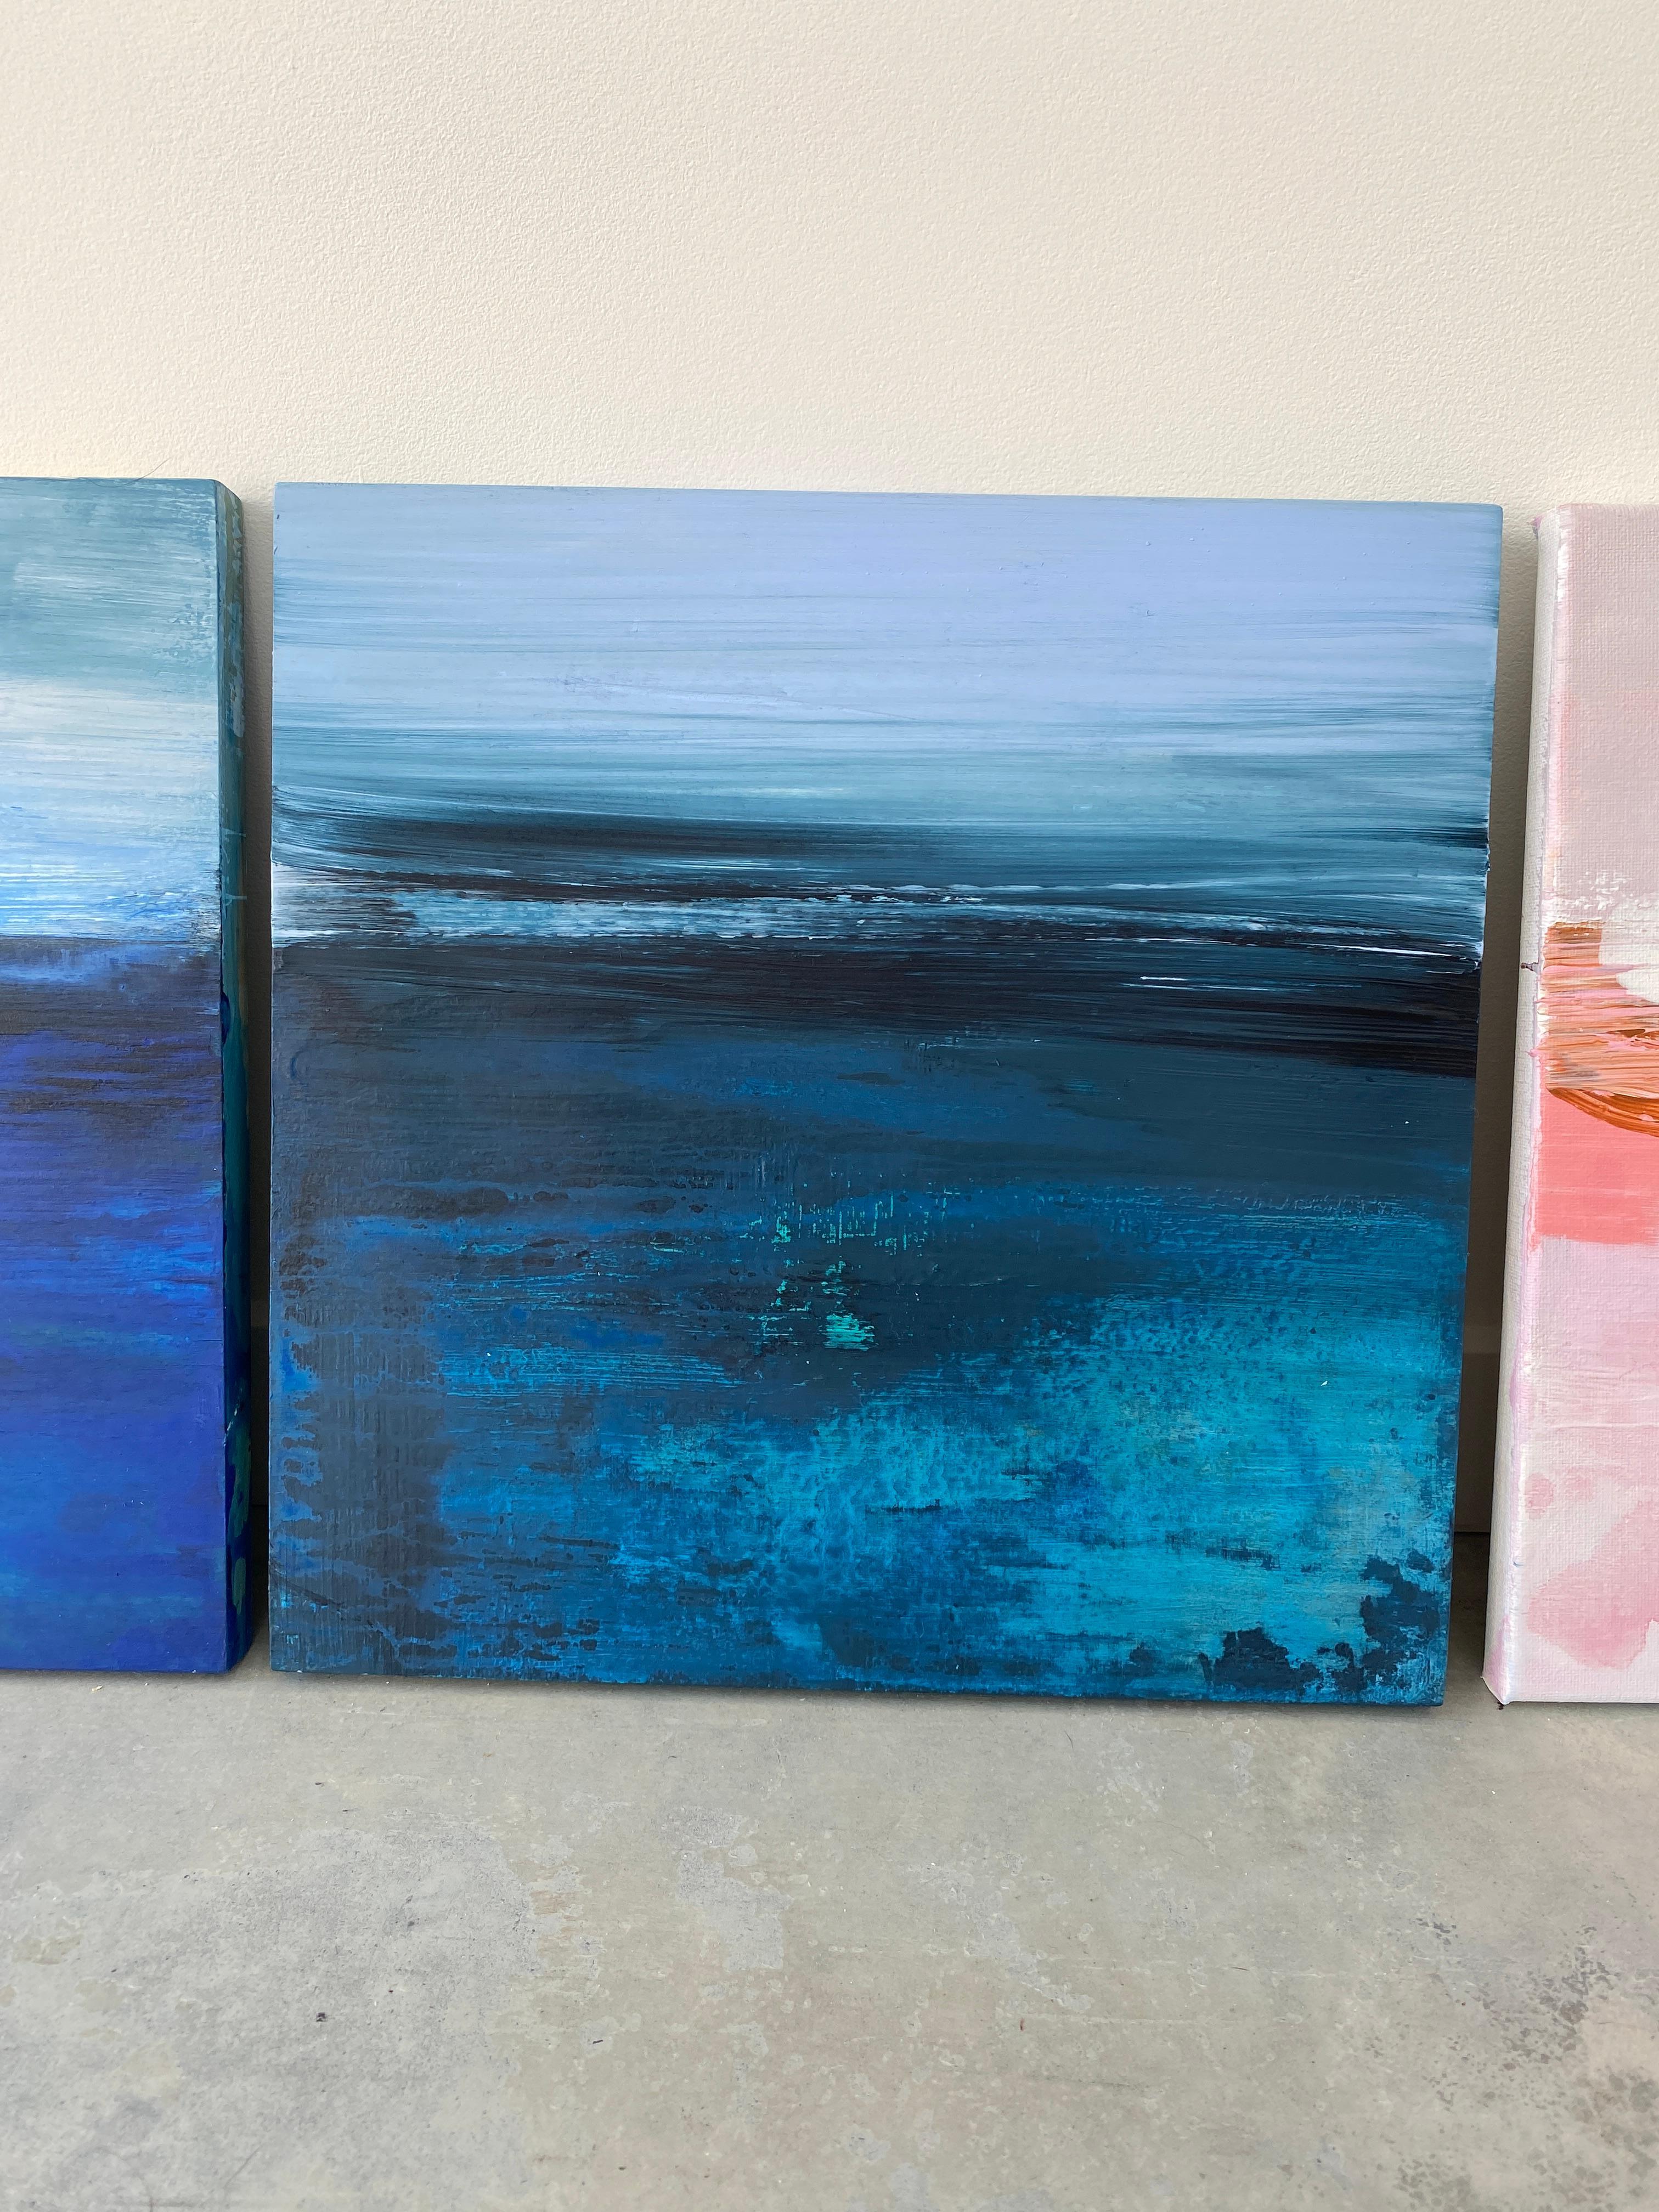 'It's Summer' a small square works collection of quality custom framed, minimalist abstract expressionist paintings on timber board. Lighten up the room with bright, summer colours of pastels, pinks, deep shades of ocean blues and aqua's. Enjoy the